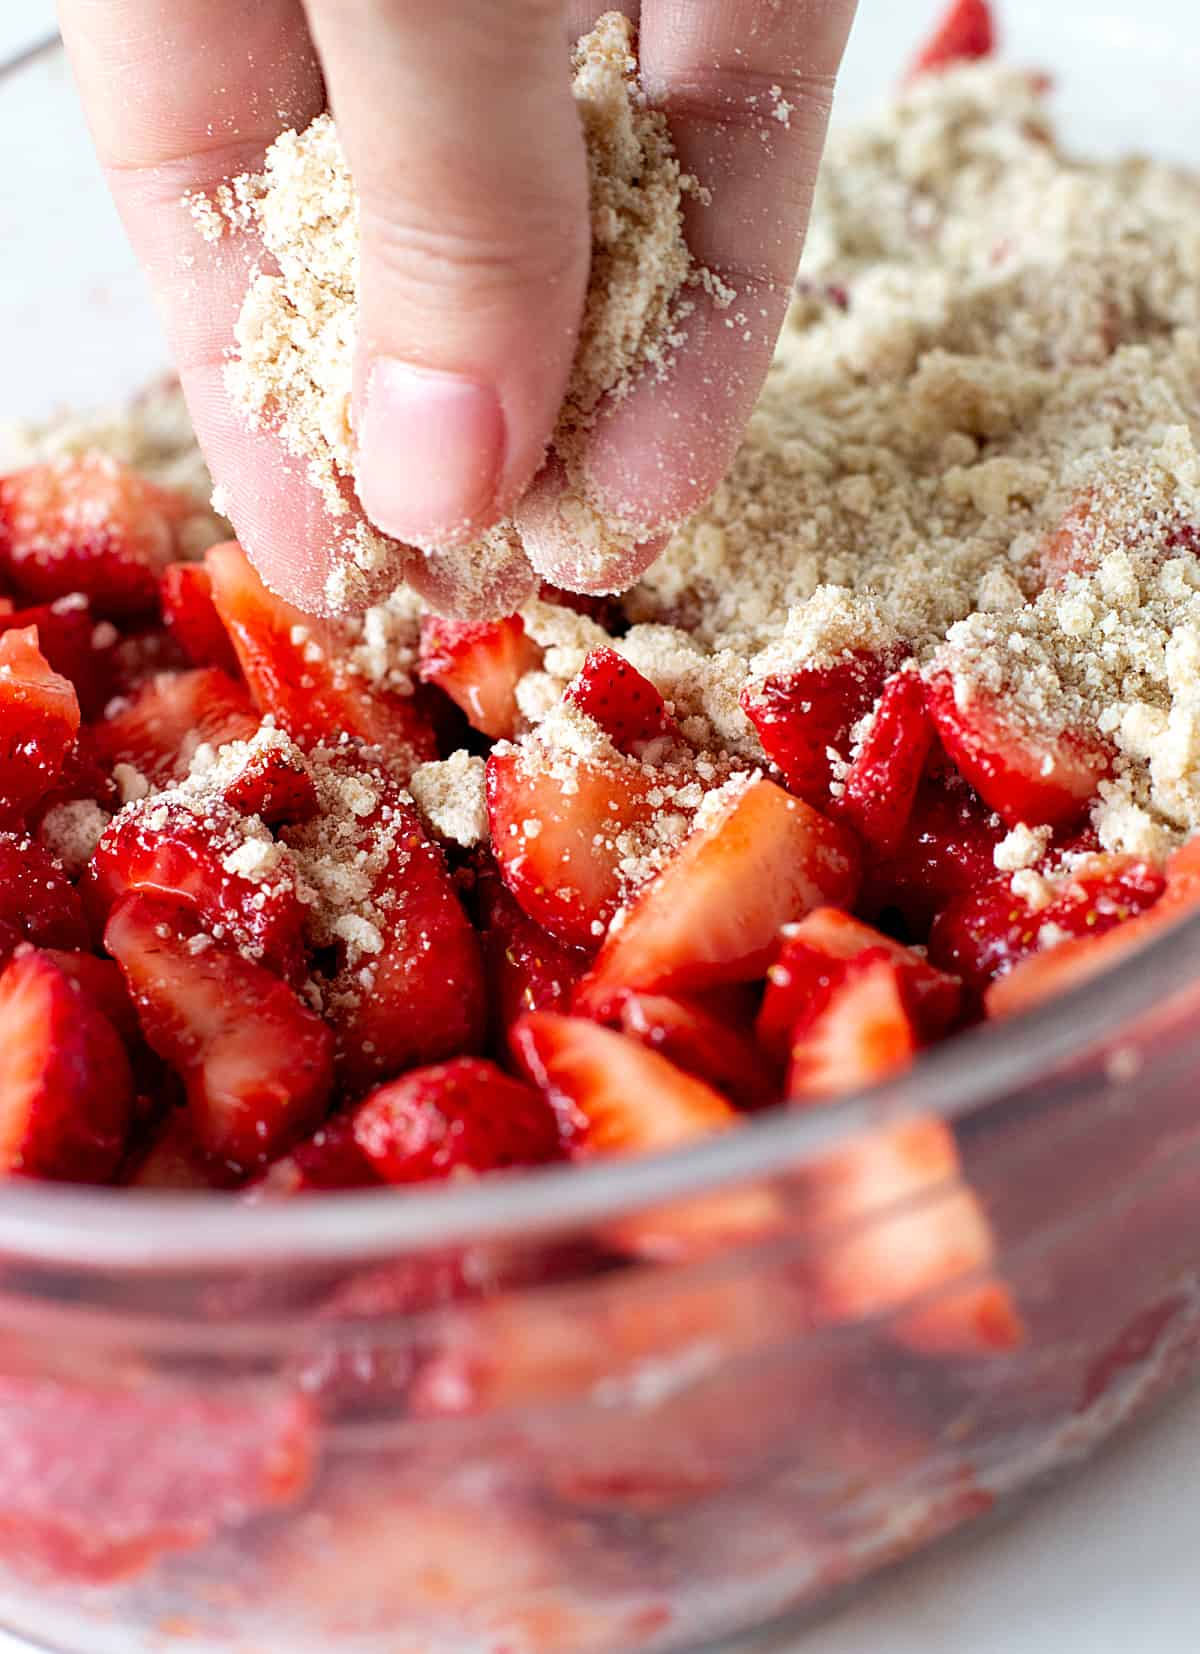 Hand adding crumble topping to glass dish with strawberries.